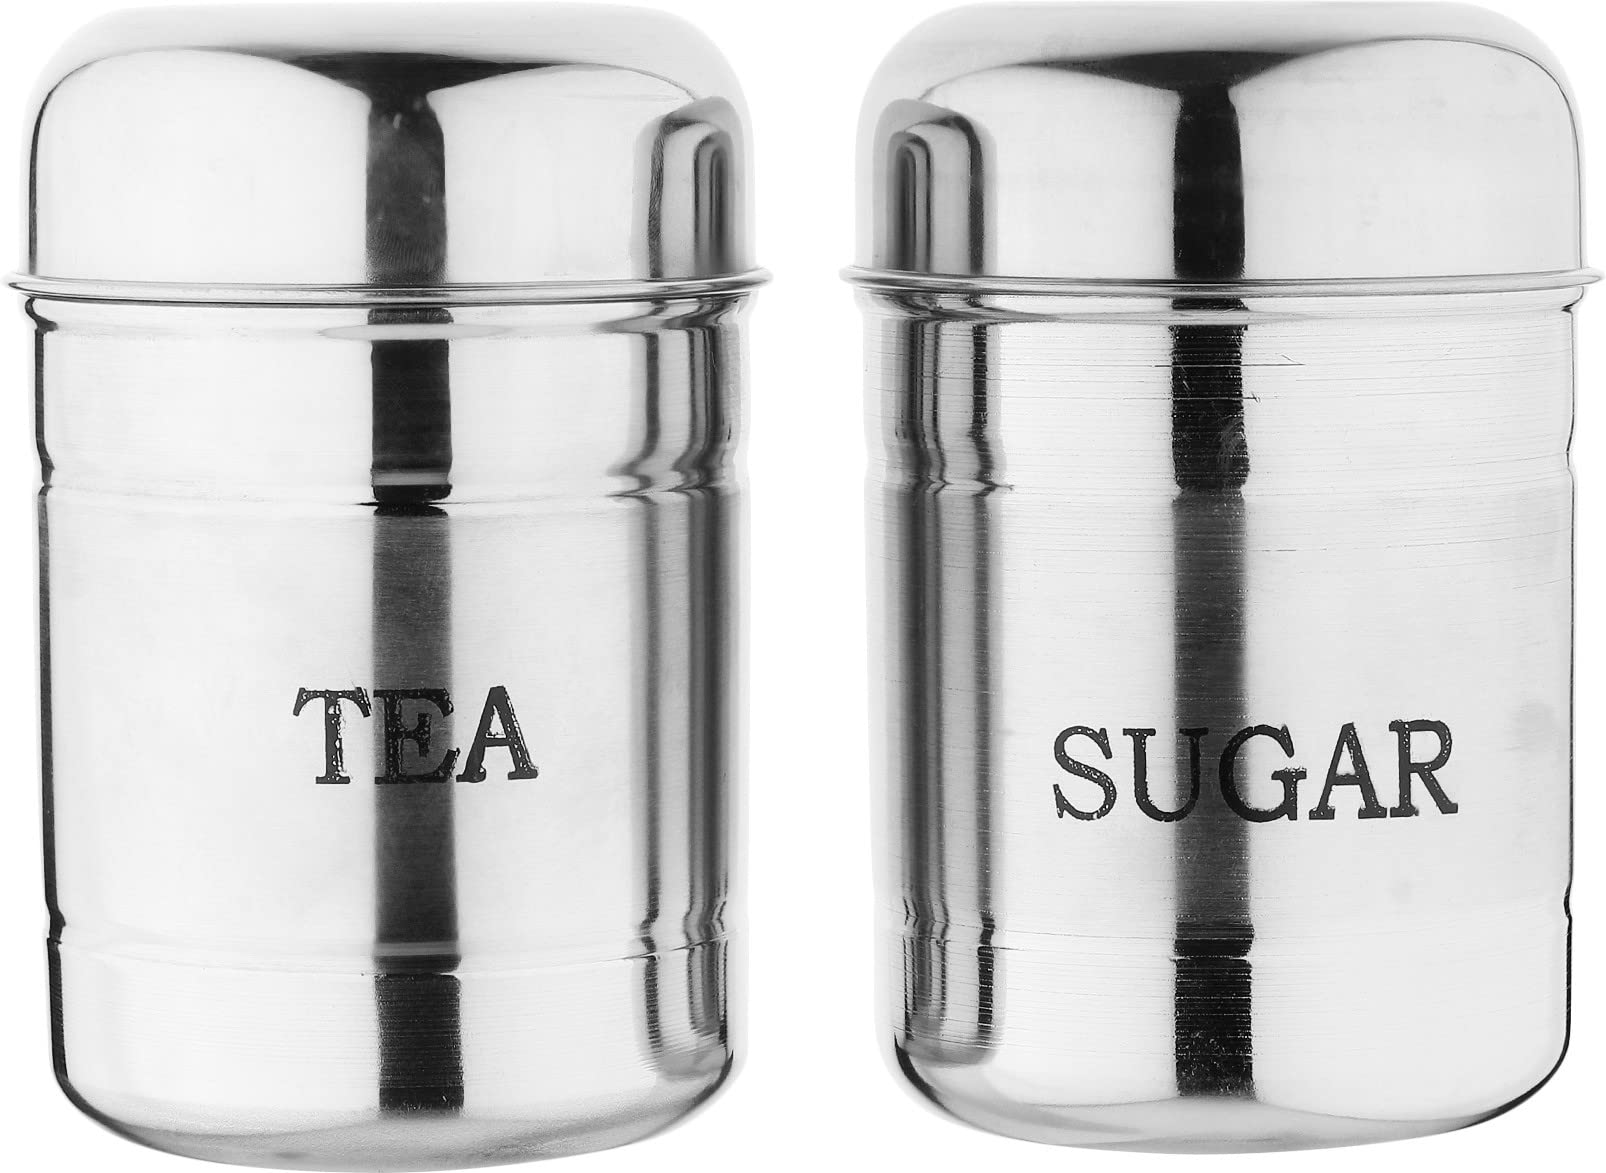 DOKCHAN DokchanTea and Sugar Containers Set with Stainless Steel Body (500ml Each box)